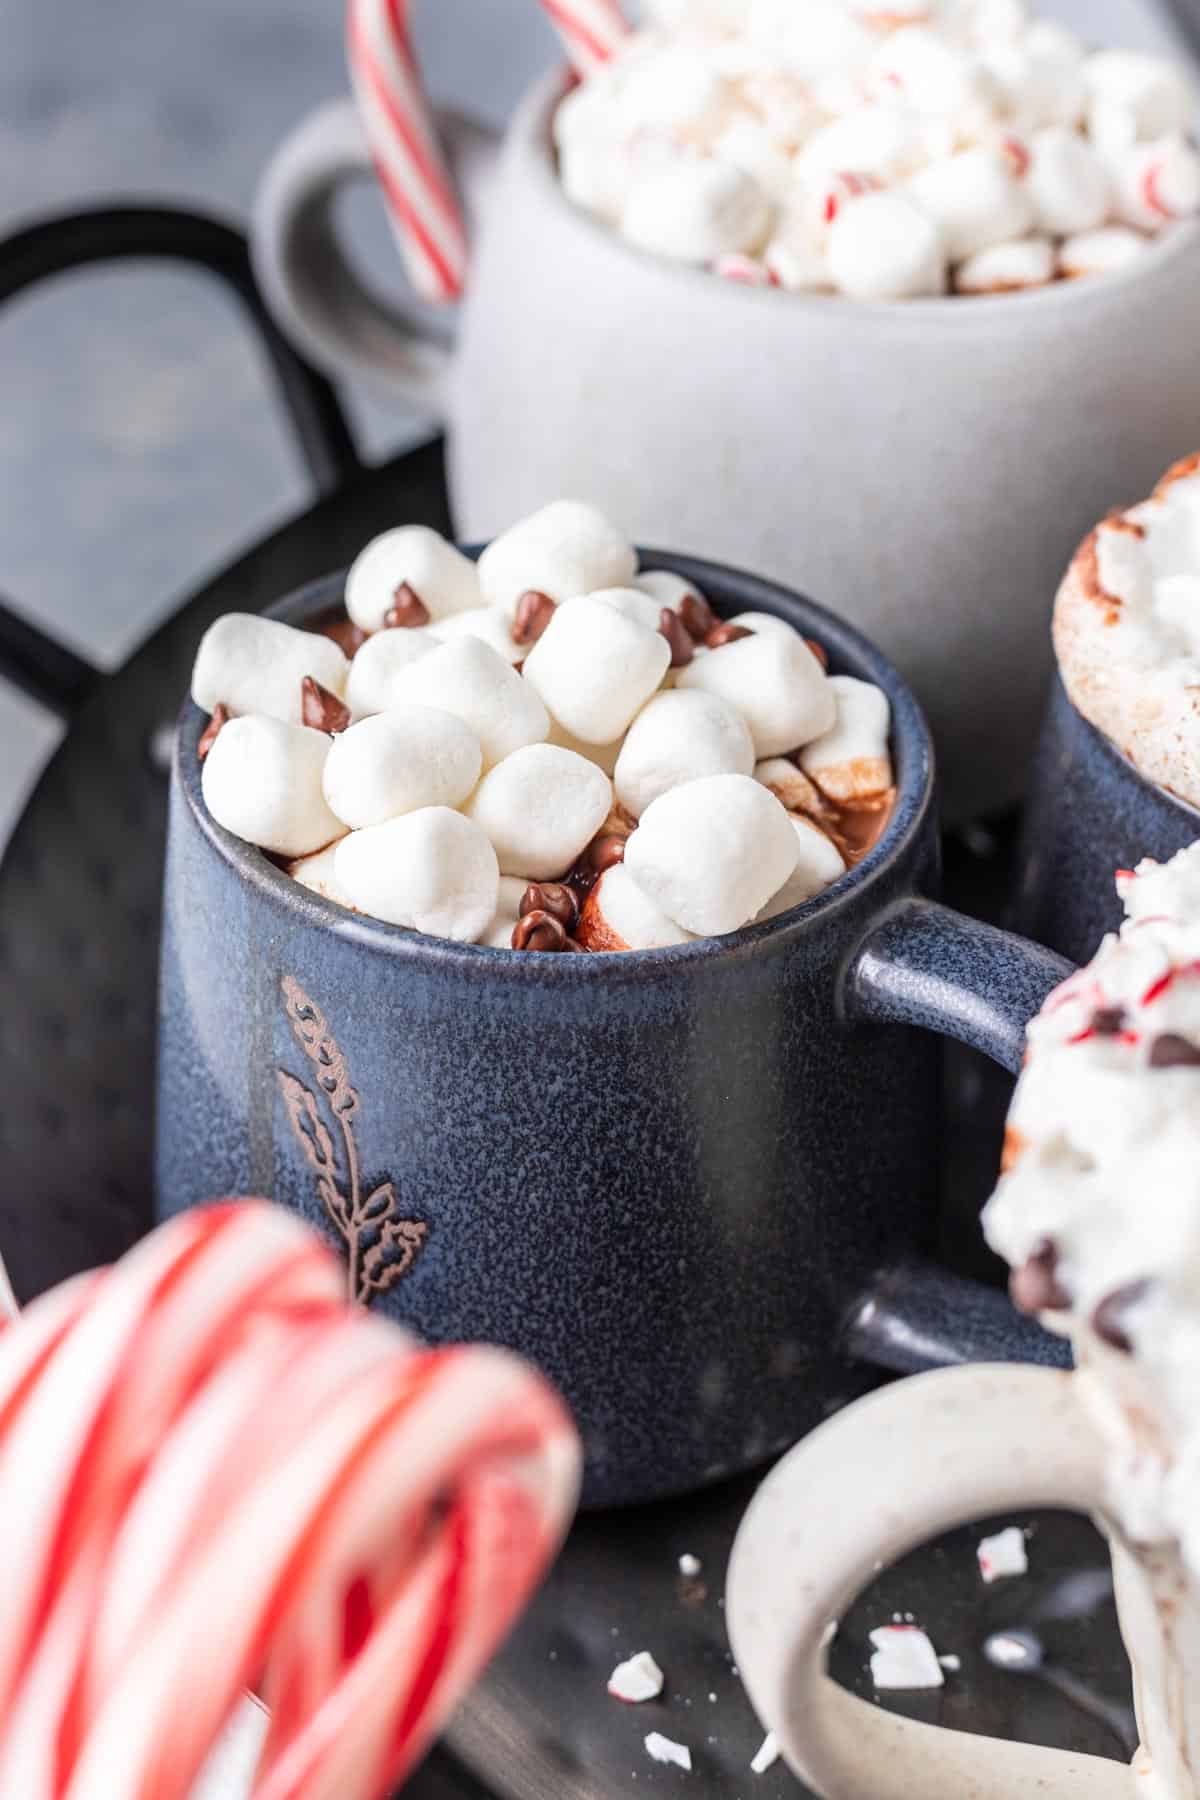 Instant pot hot chocolate in a mug topped with marshmallows and chocolate chips.